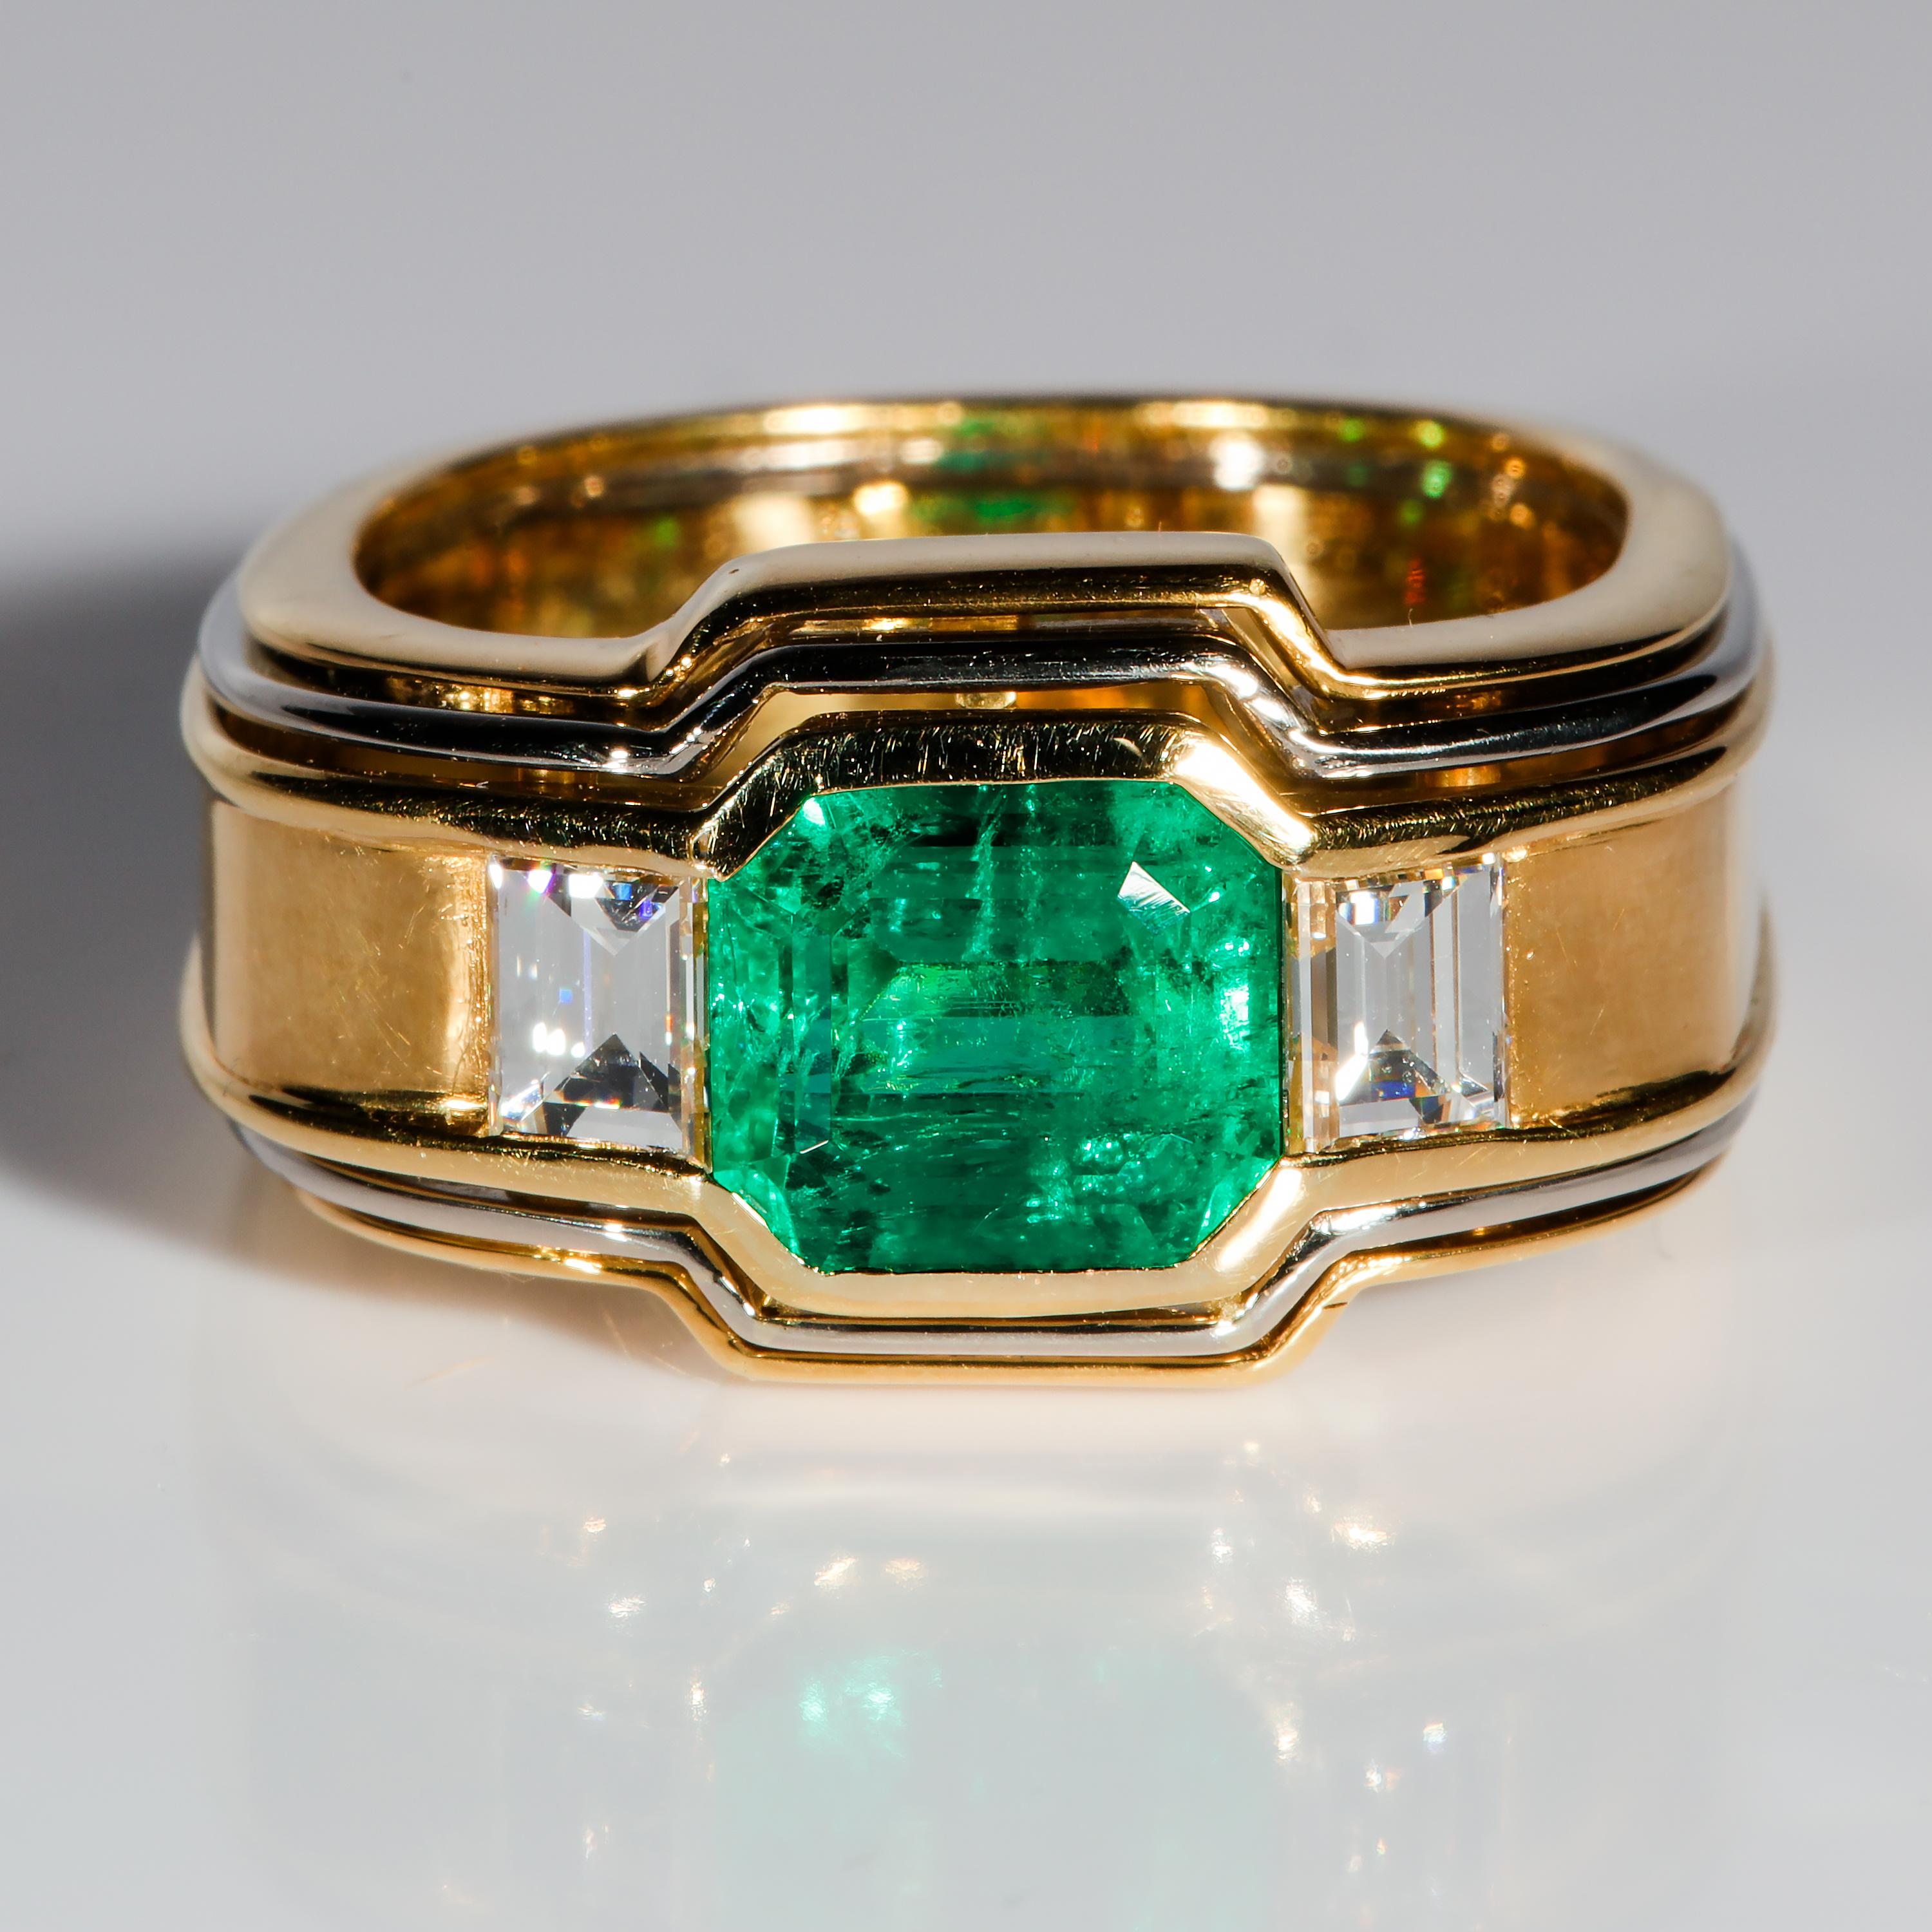 A rare and impressive men's ring featuring a prize Colombian emerald of exceptional size and coloring.

This had to have been designed by an architect. The perfection in its design is startling. First and foremost, this ring is constructed around an